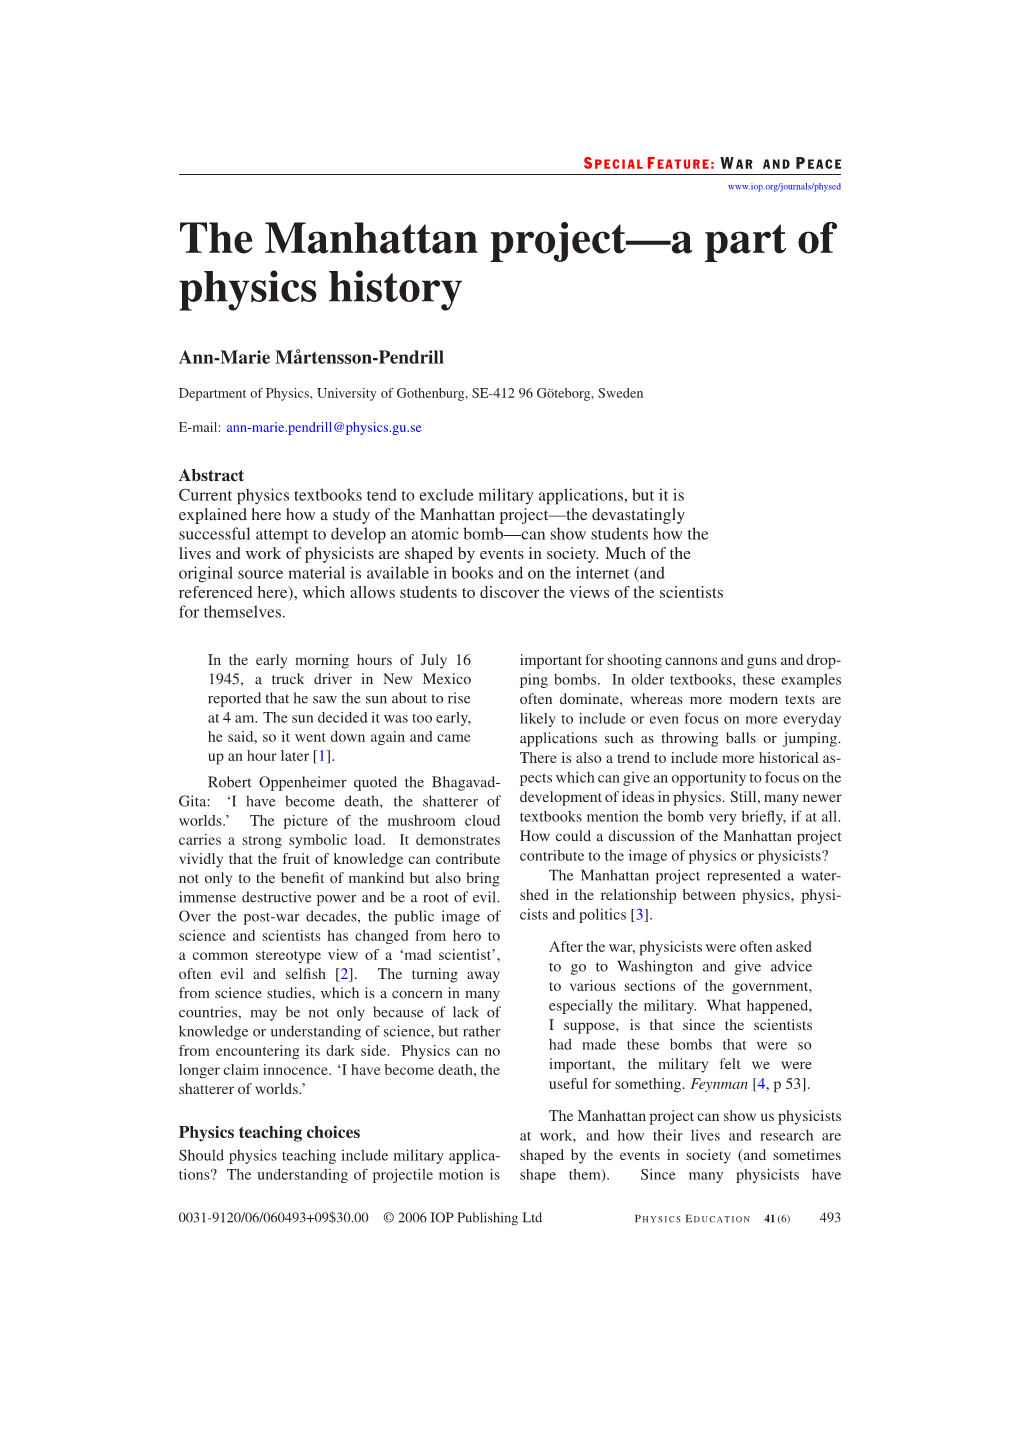 The Manhattan Project—A Part of Physics History